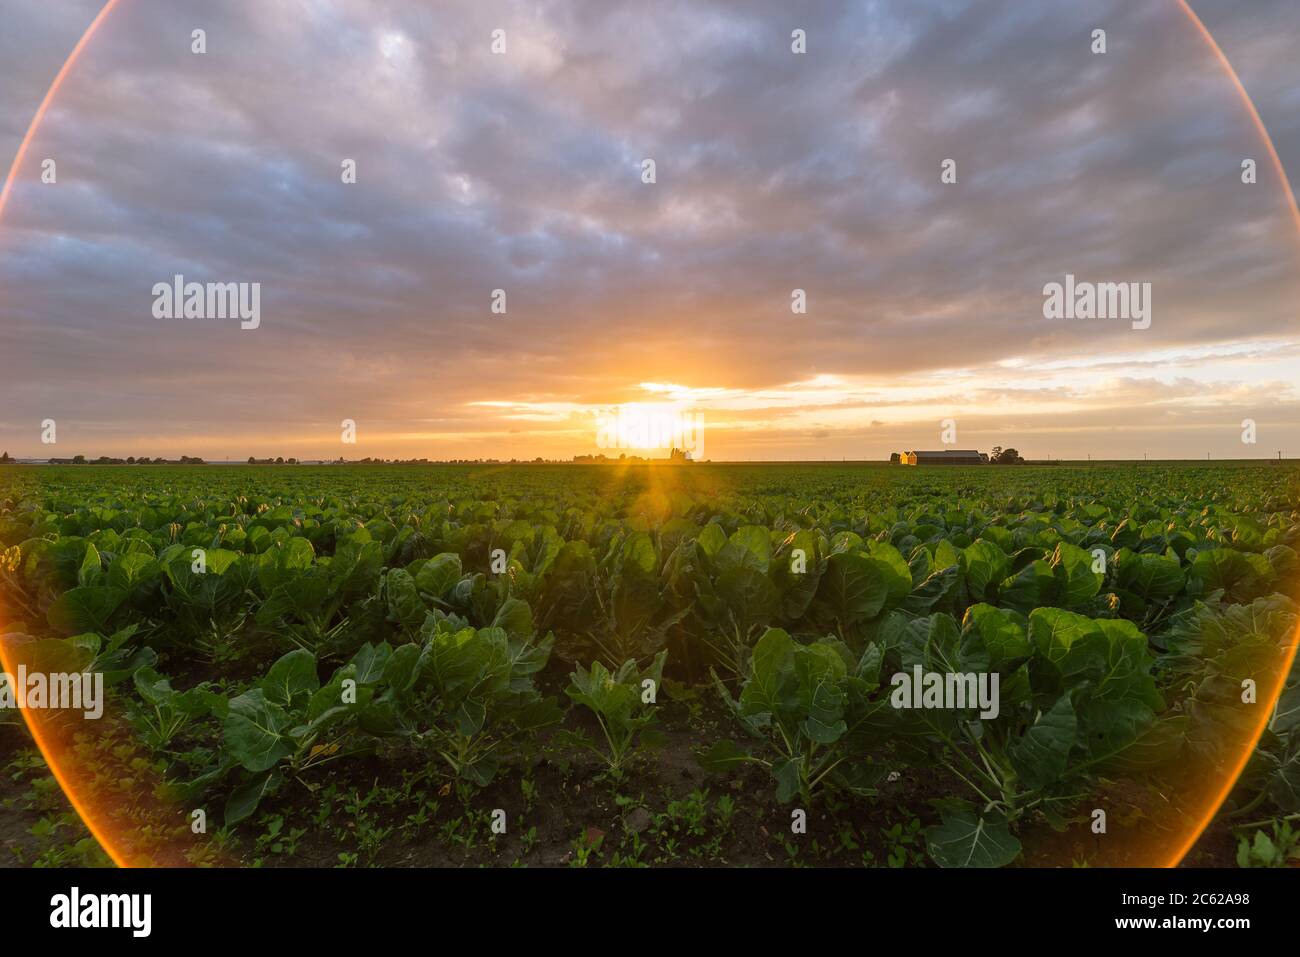 Colorful sunset over a cabbage field. Colored circle is caused by a lens flare by aiming an ultra wide lens exactly at the position of the sun. Stock Photo